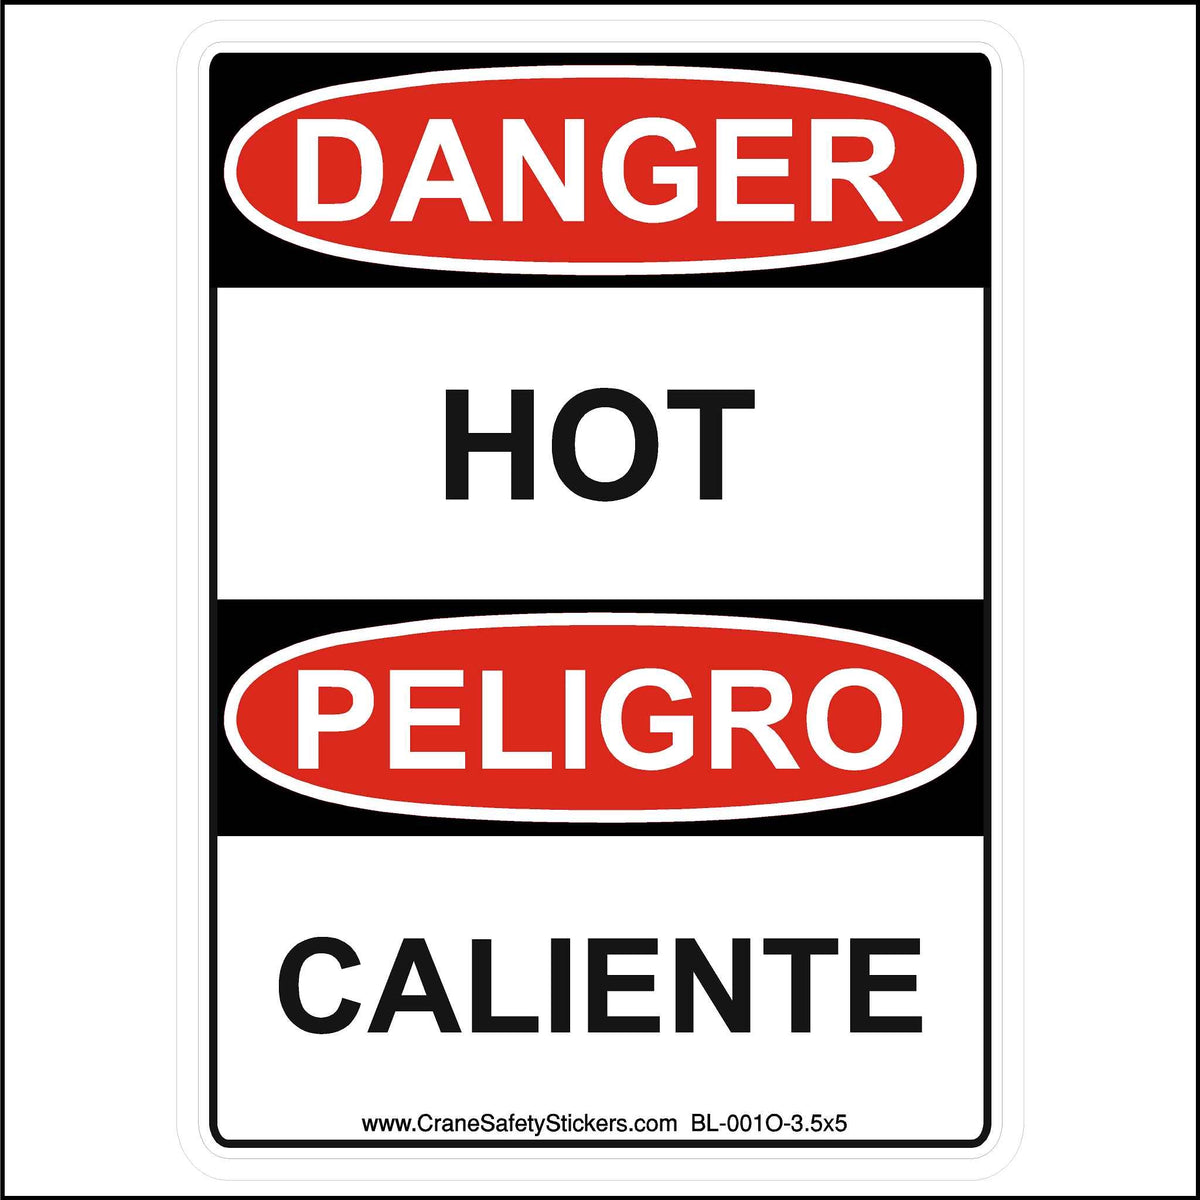 This Bilingual Danger Hot Peligro Caliente Safety Sticker in English and Spanish Printed With. DANGER HOT, PELIGRO CALIENTE.